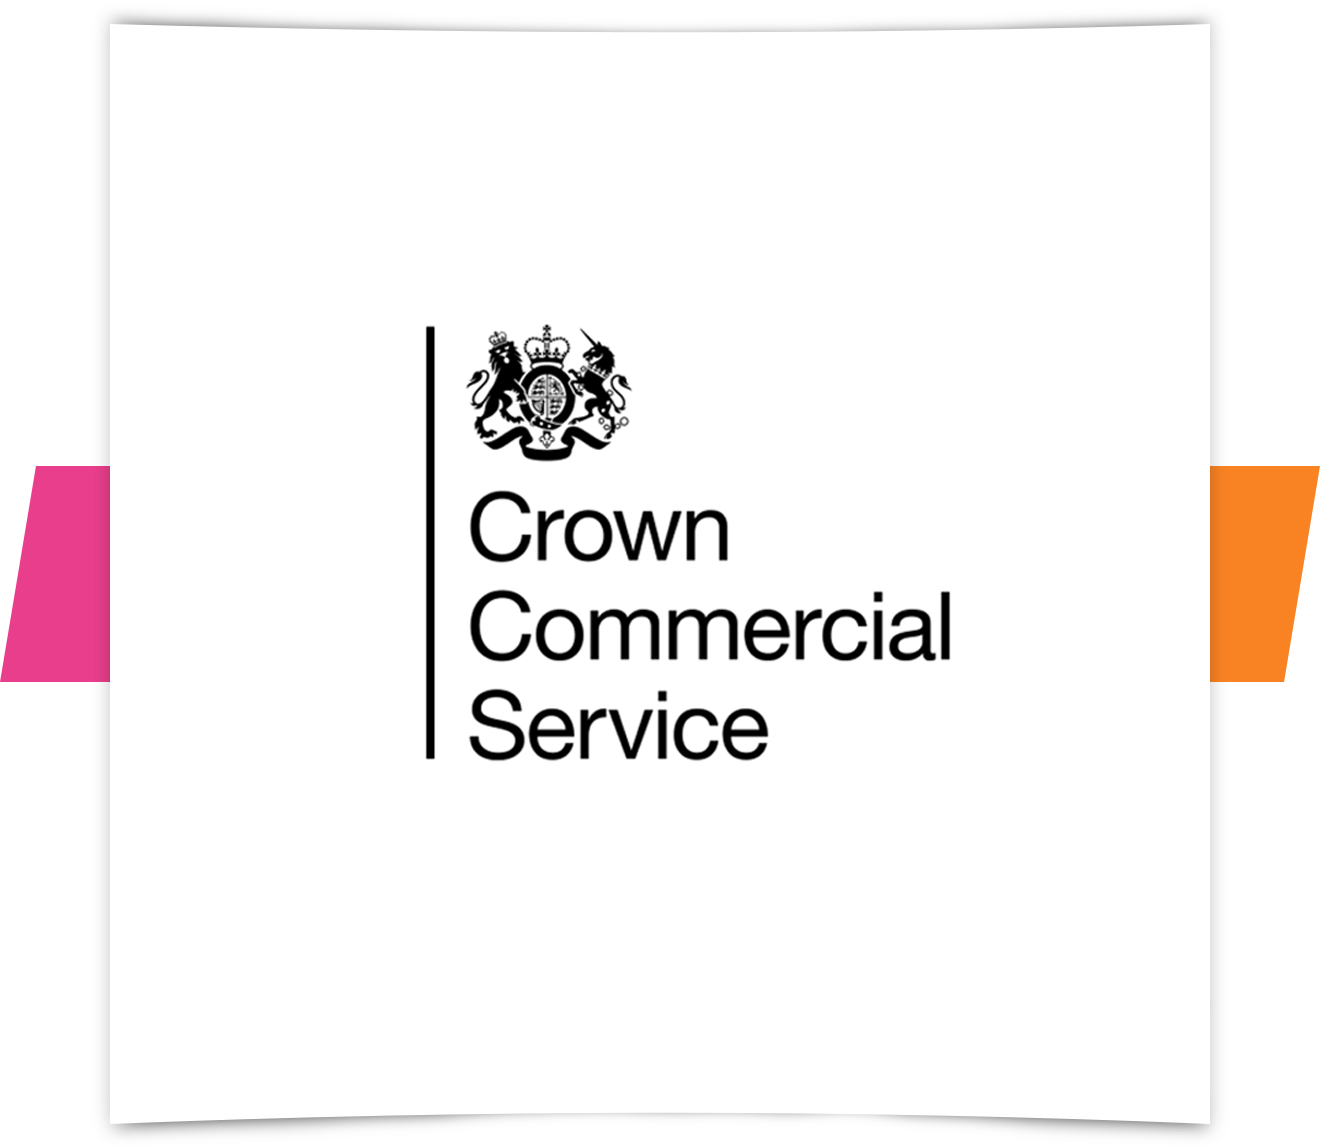 crowm commercial services logo